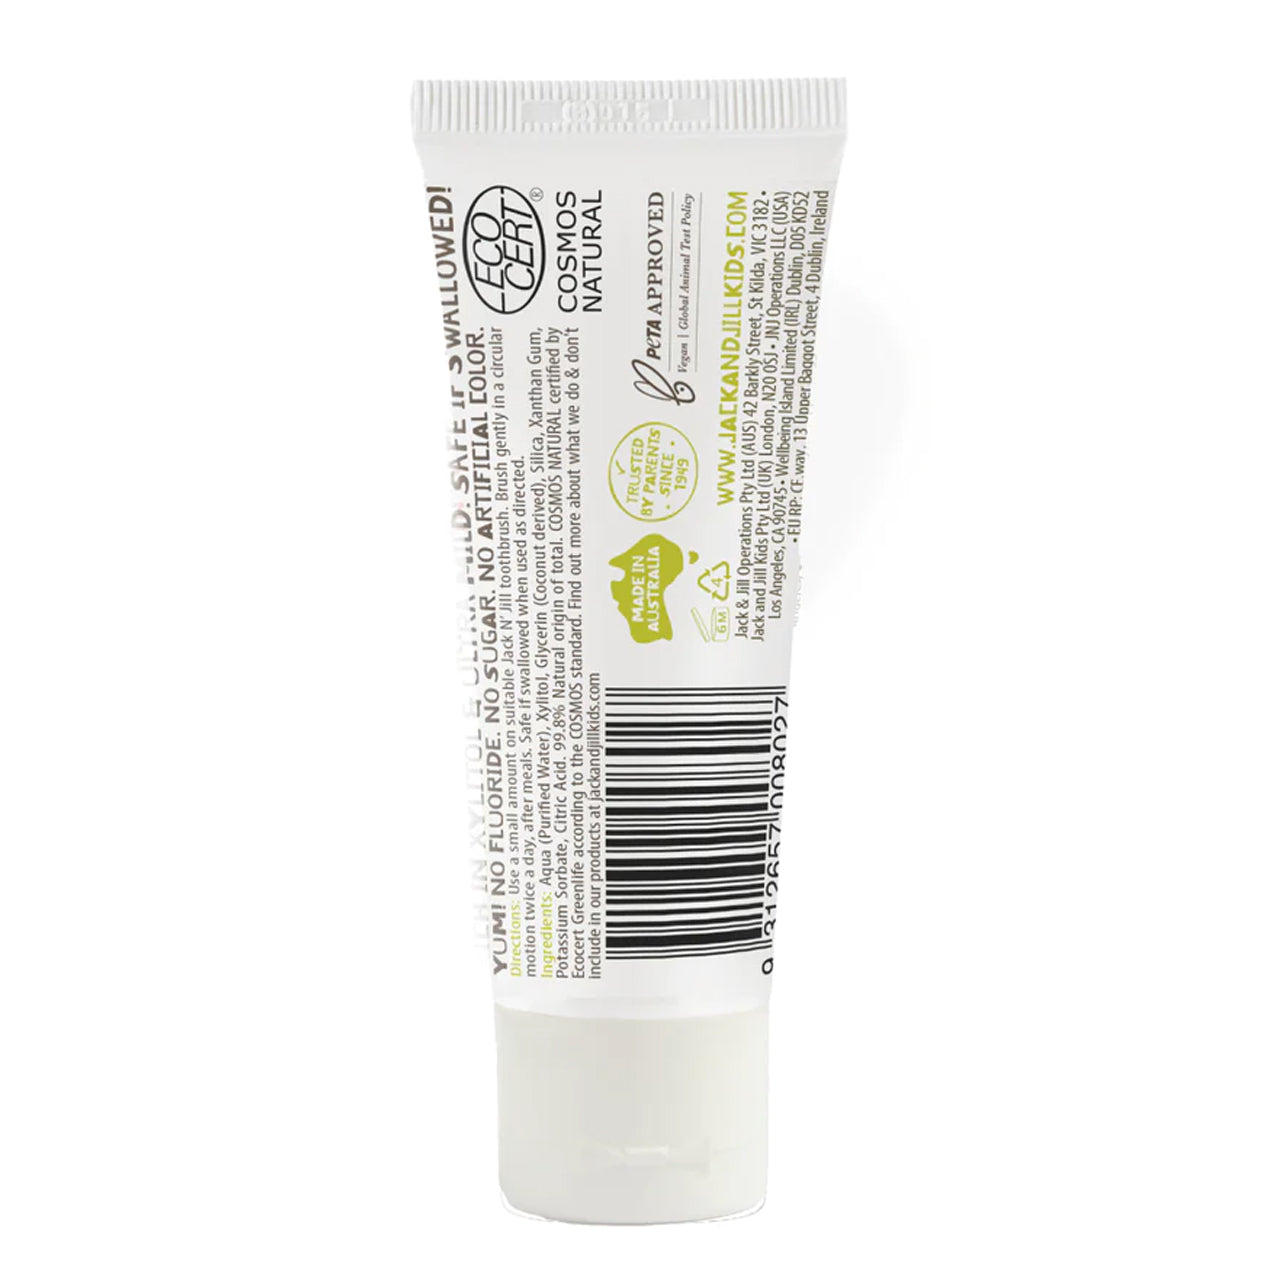 Jack n' Jill - Organic Natural Toothpaste | 50g | Flavor Free | Fluoride FREE